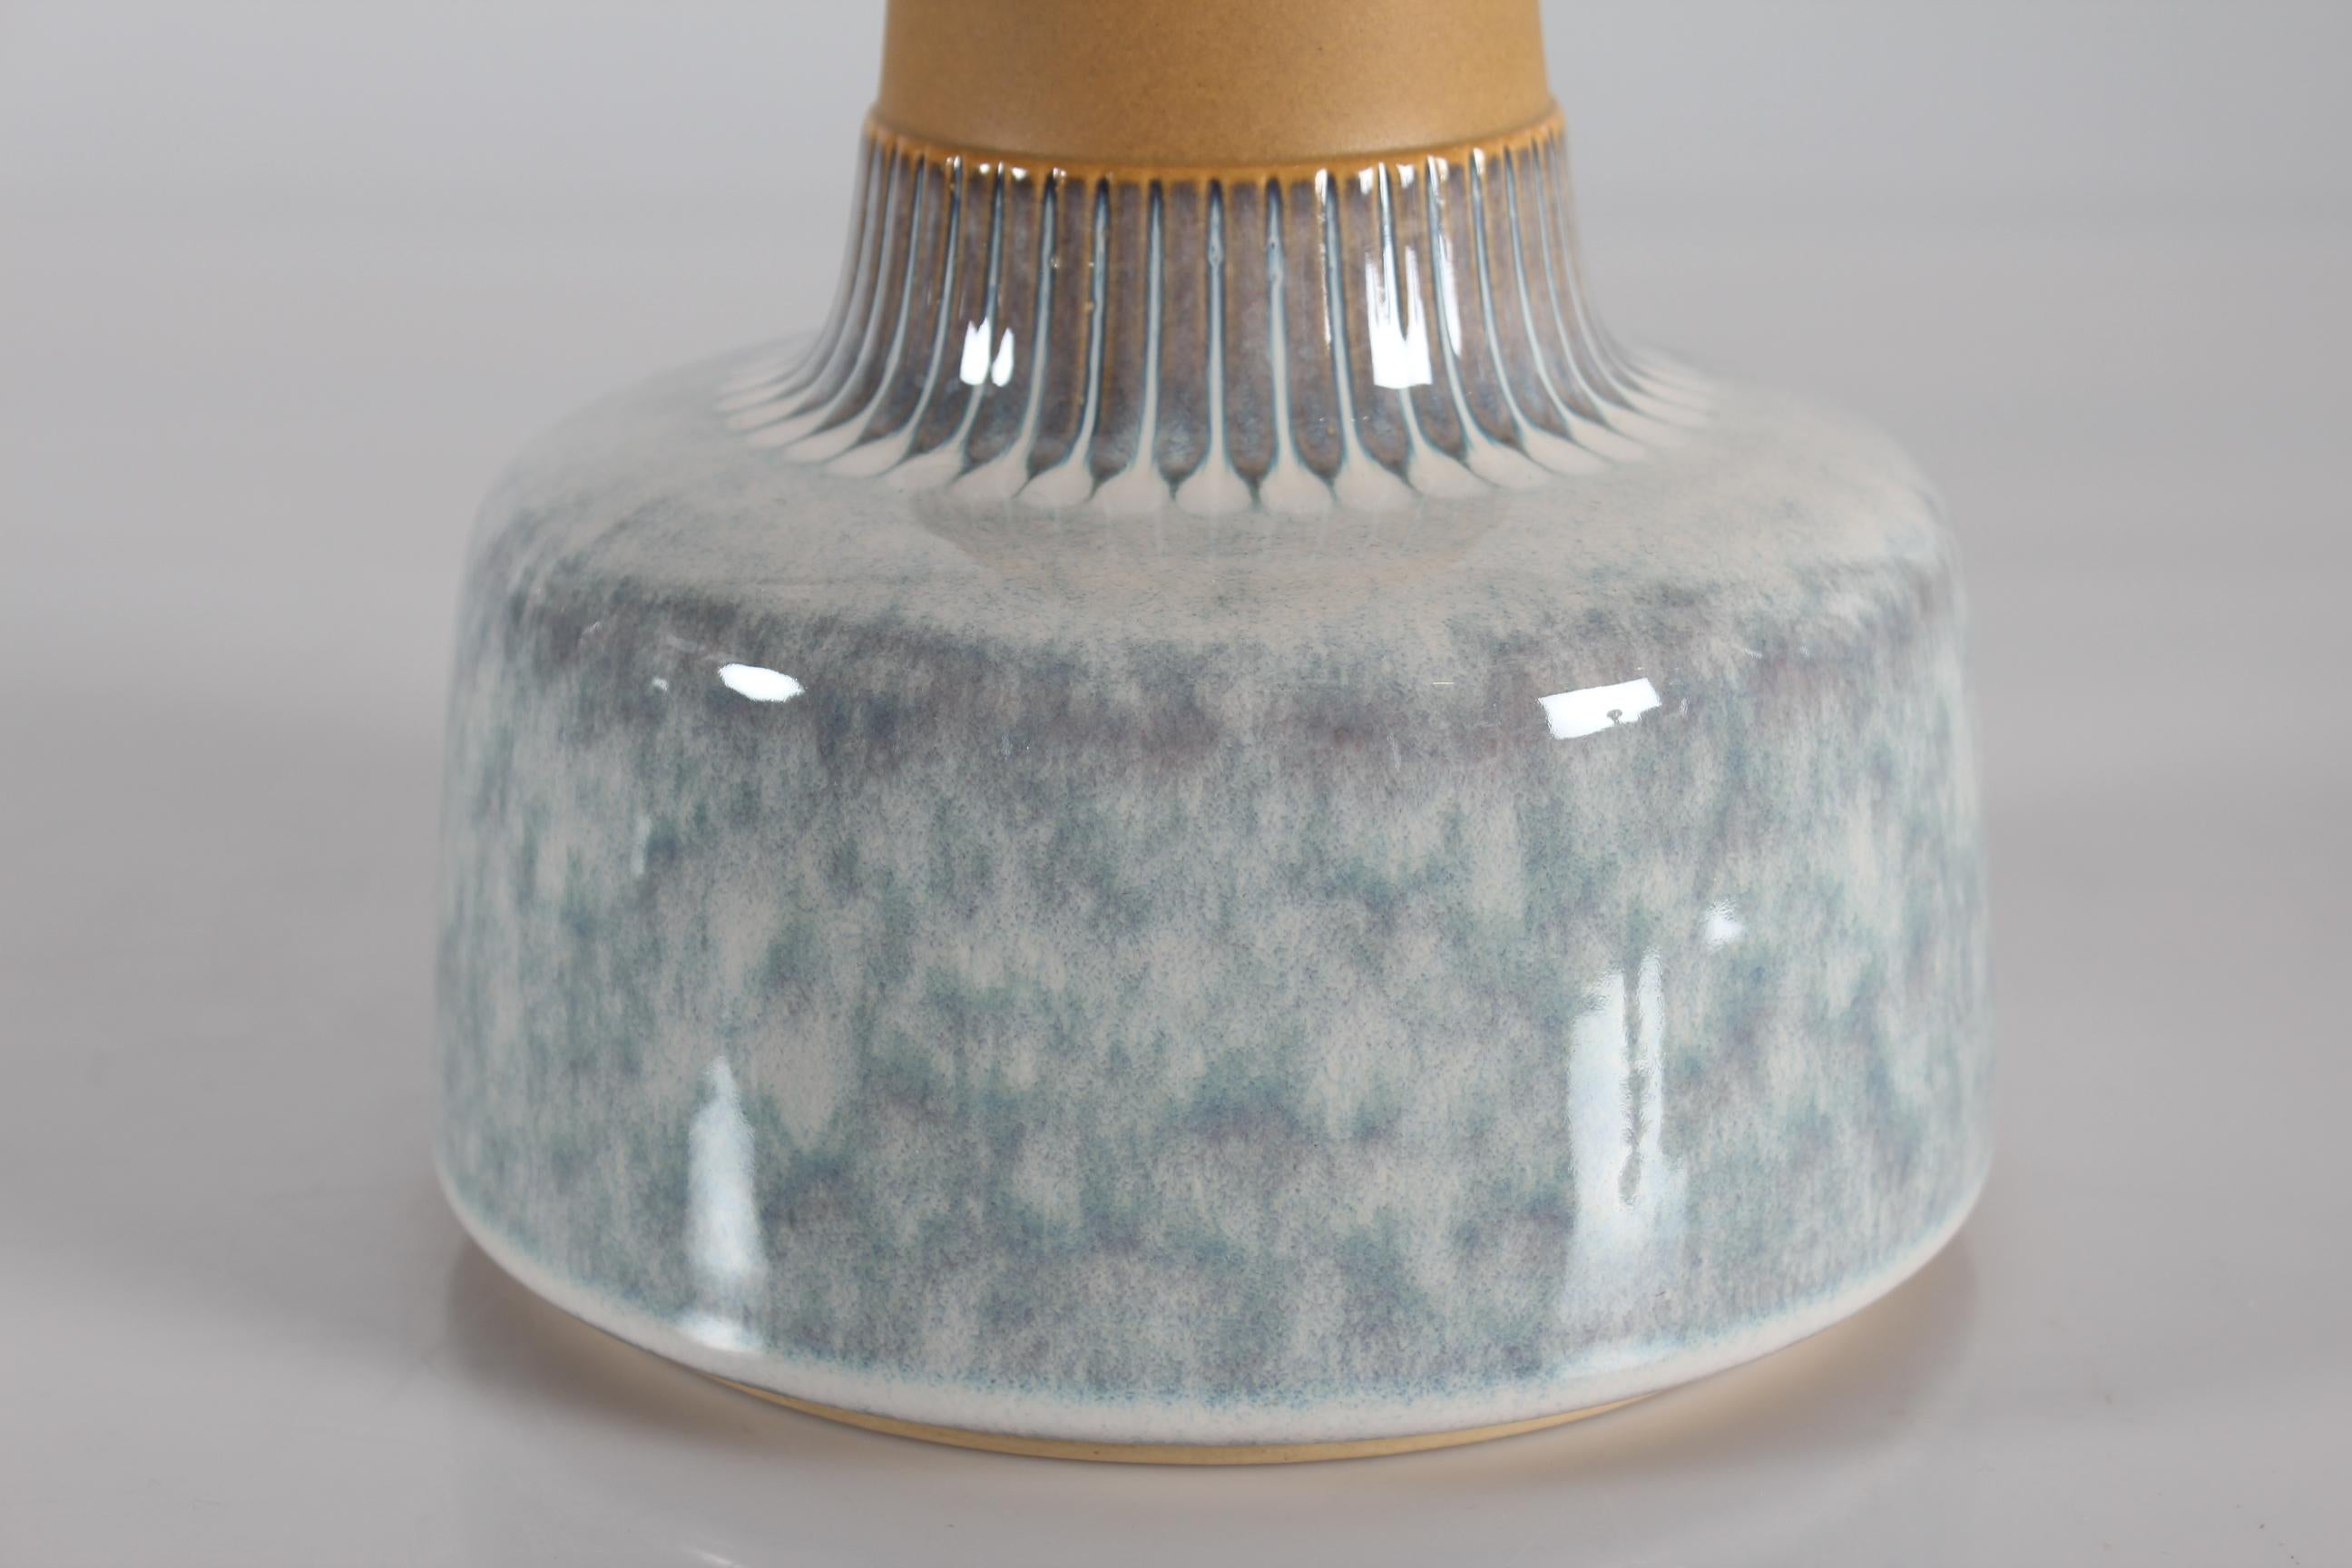 Midcentury tall table lamp by Danish stoneware manufacturer Søholm, designed by Einar Johansen and produced in the 1960s

The bottom part of the lamp has a glossy glaze of mixed light blue, white and grey colors changing into a more well defined